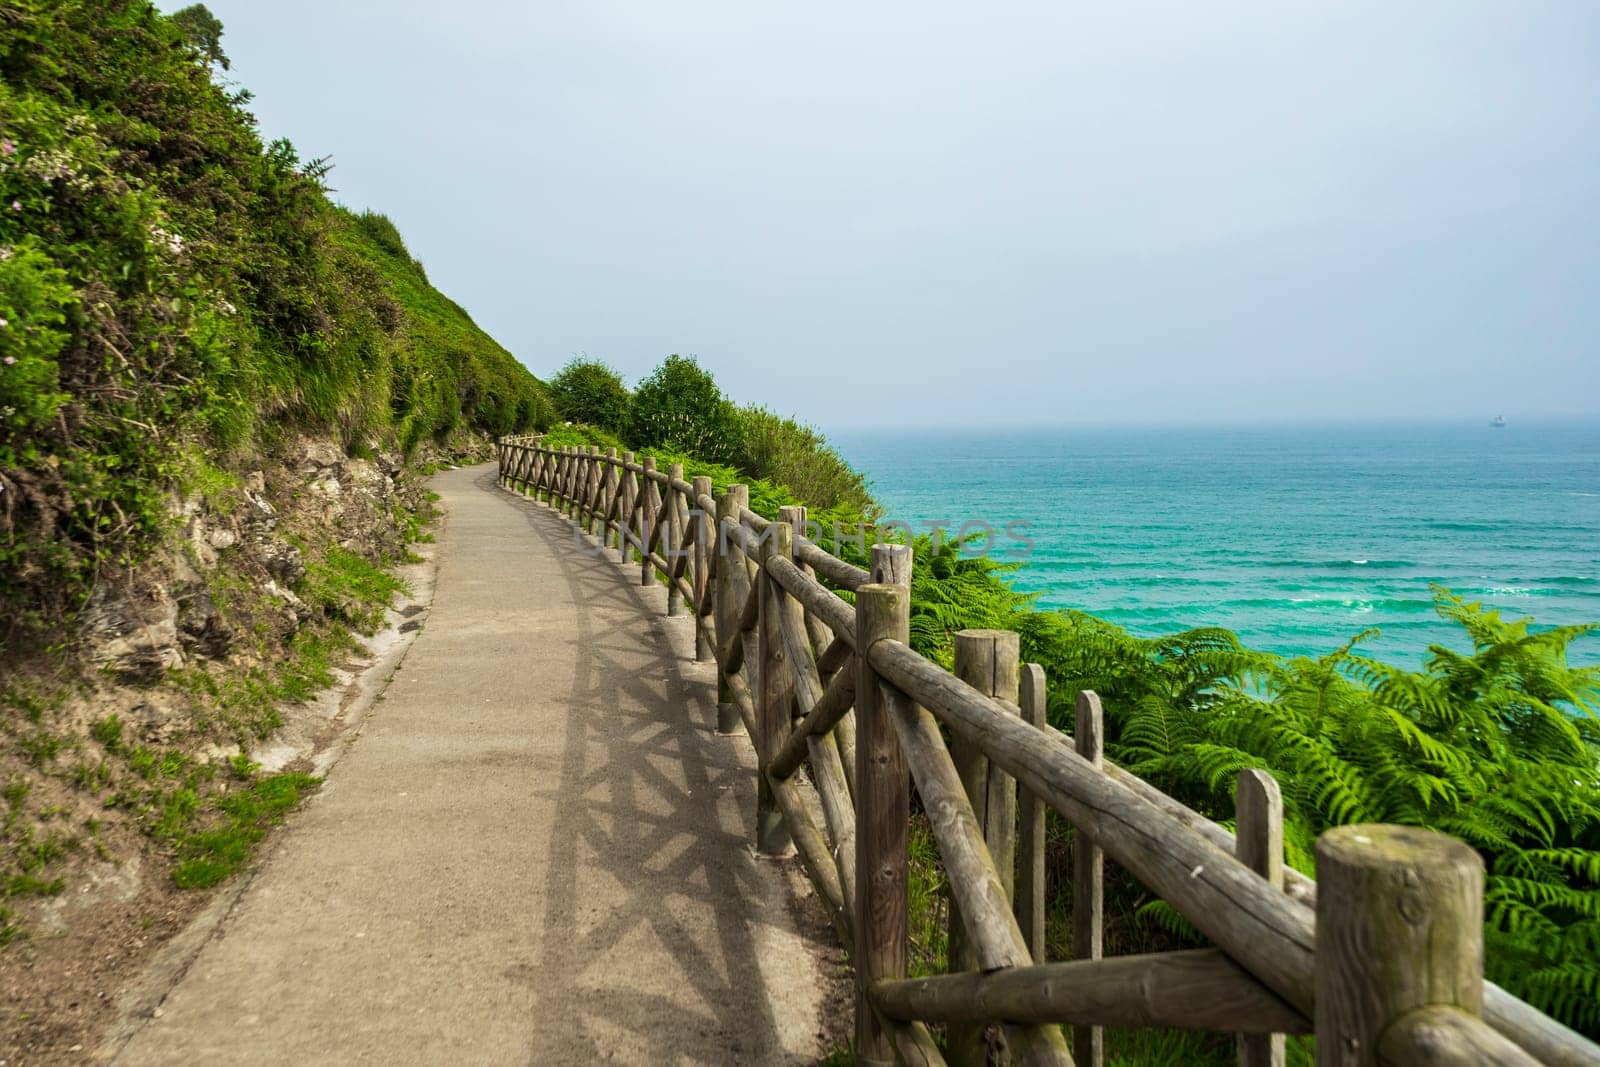 mountain trail enclosed by a wooden fence next to Atlantic Ocean by paca-waca